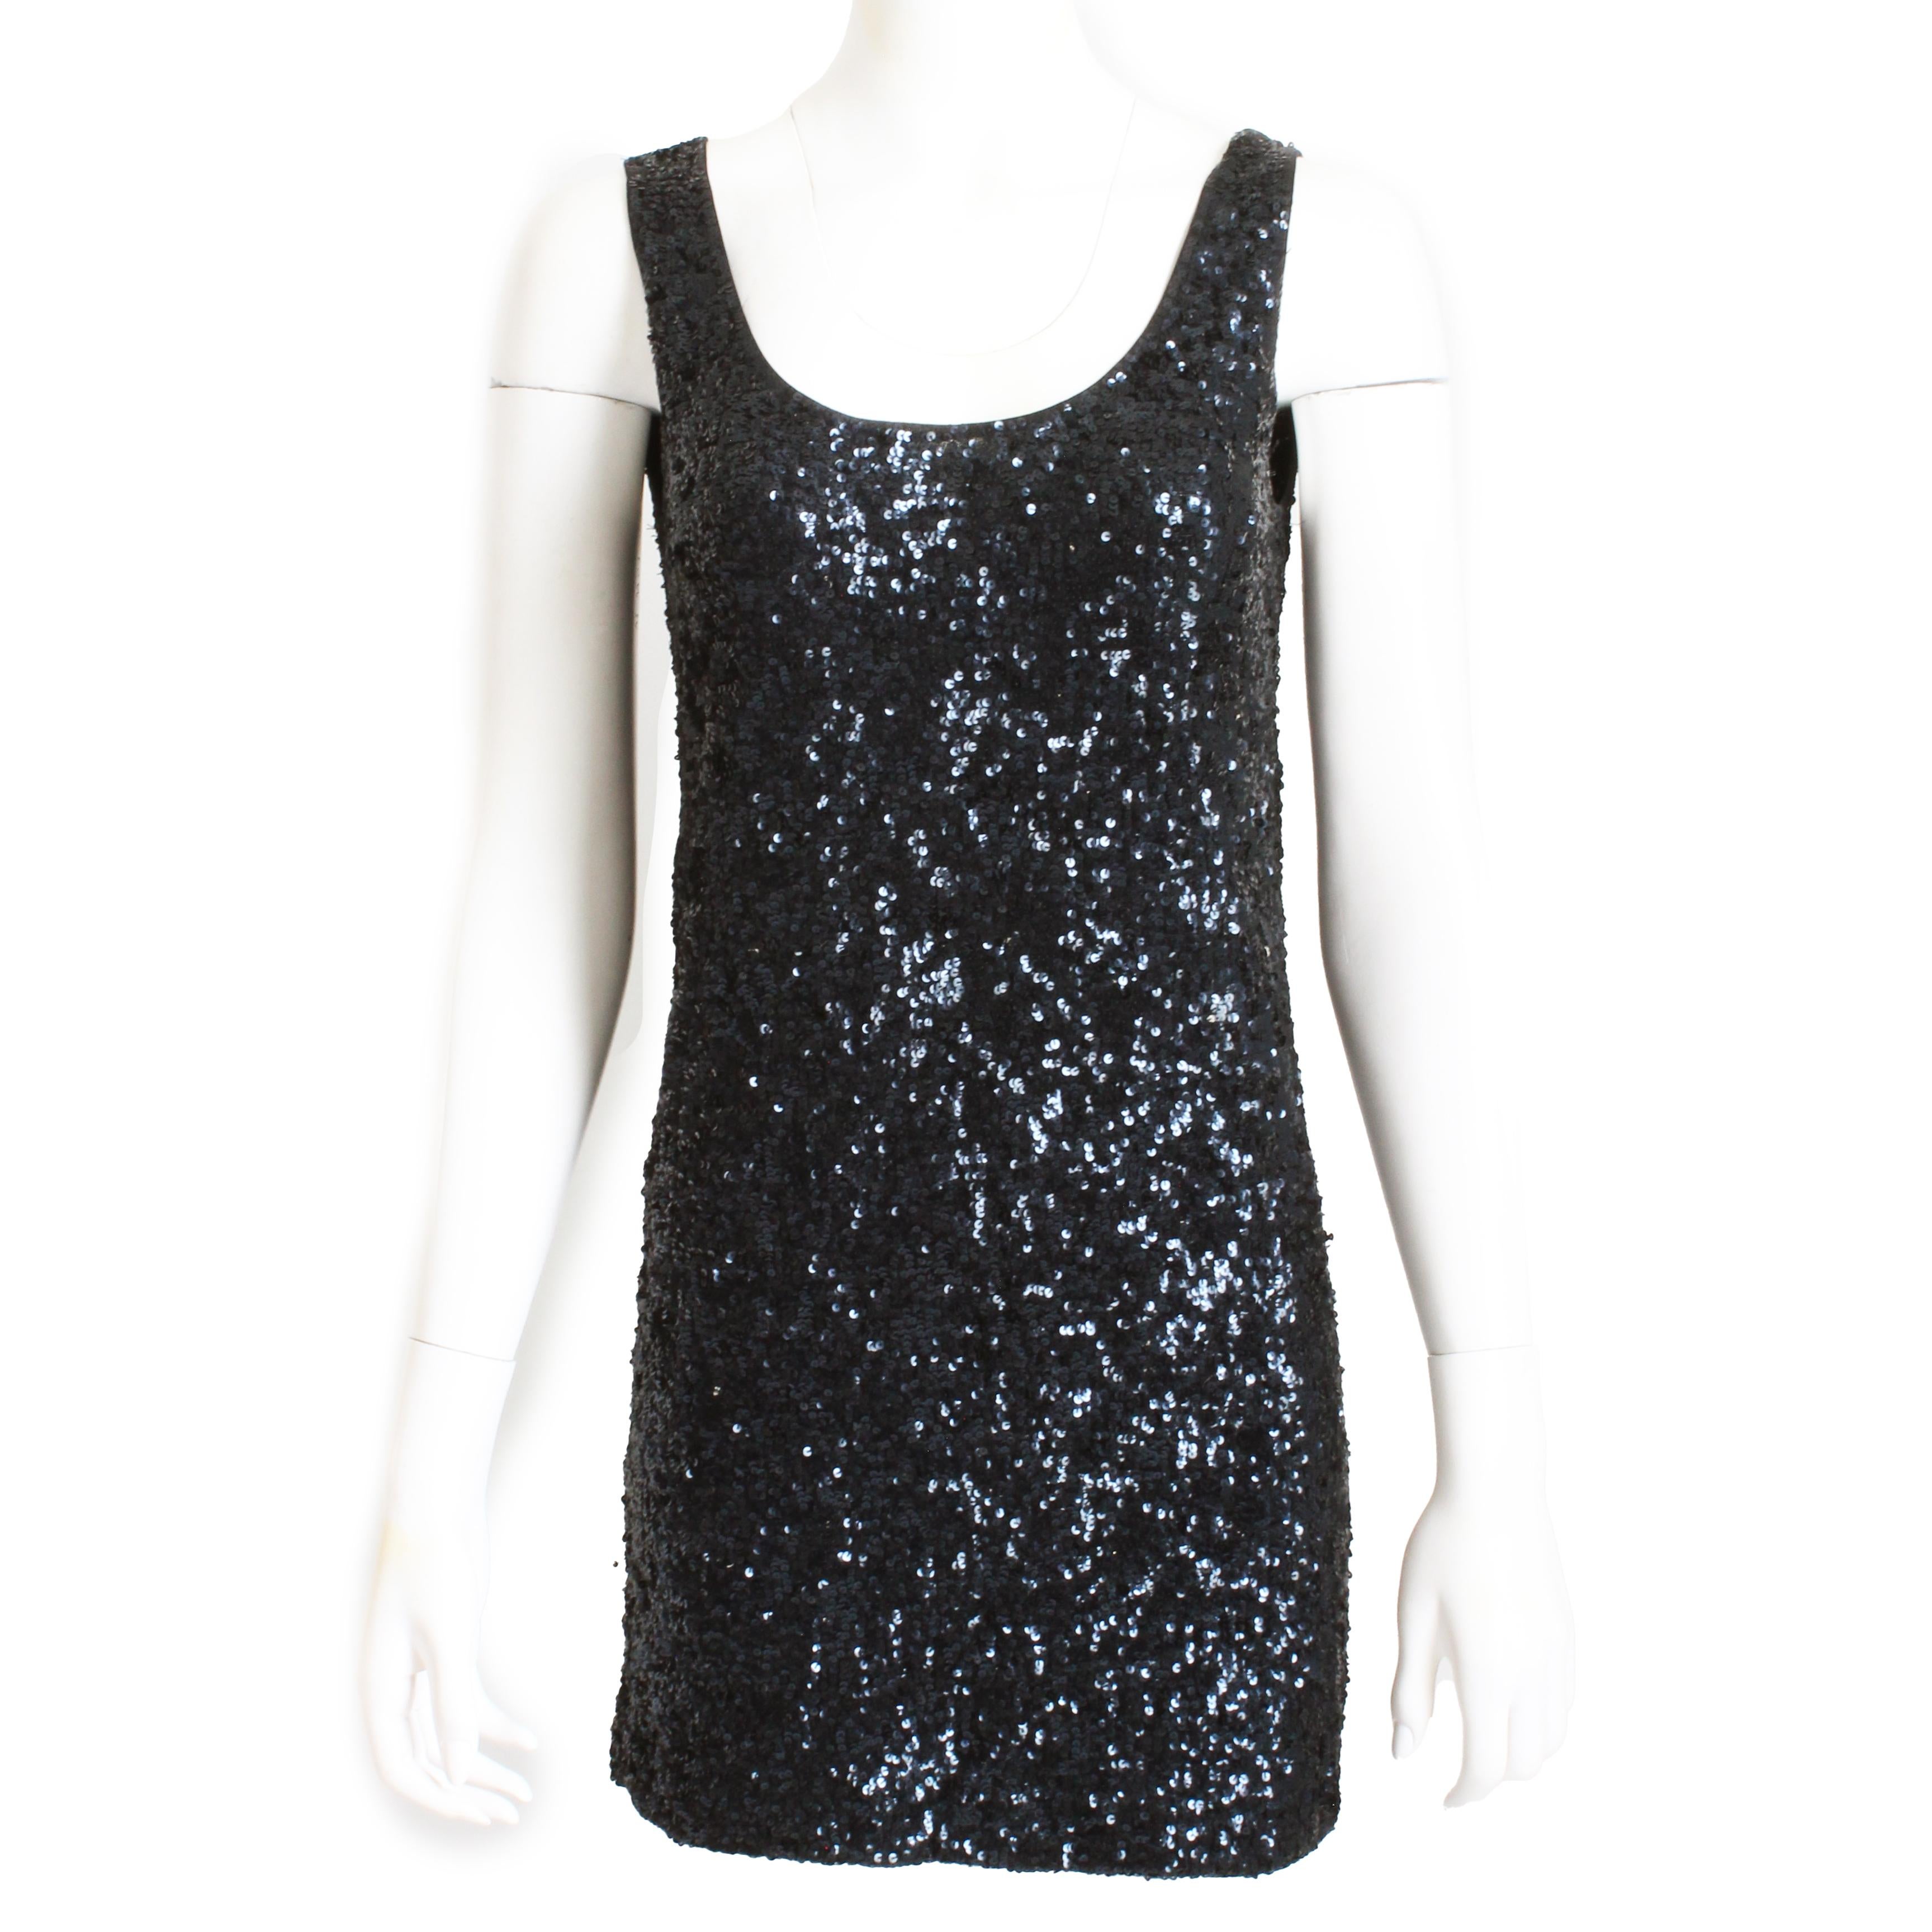 Donna Karan Mini Dress Black Silk Knit Sequins Party Cocktail Sexy LBD Vintage S In Good Condition For Sale In Port Saint Lucie, FL